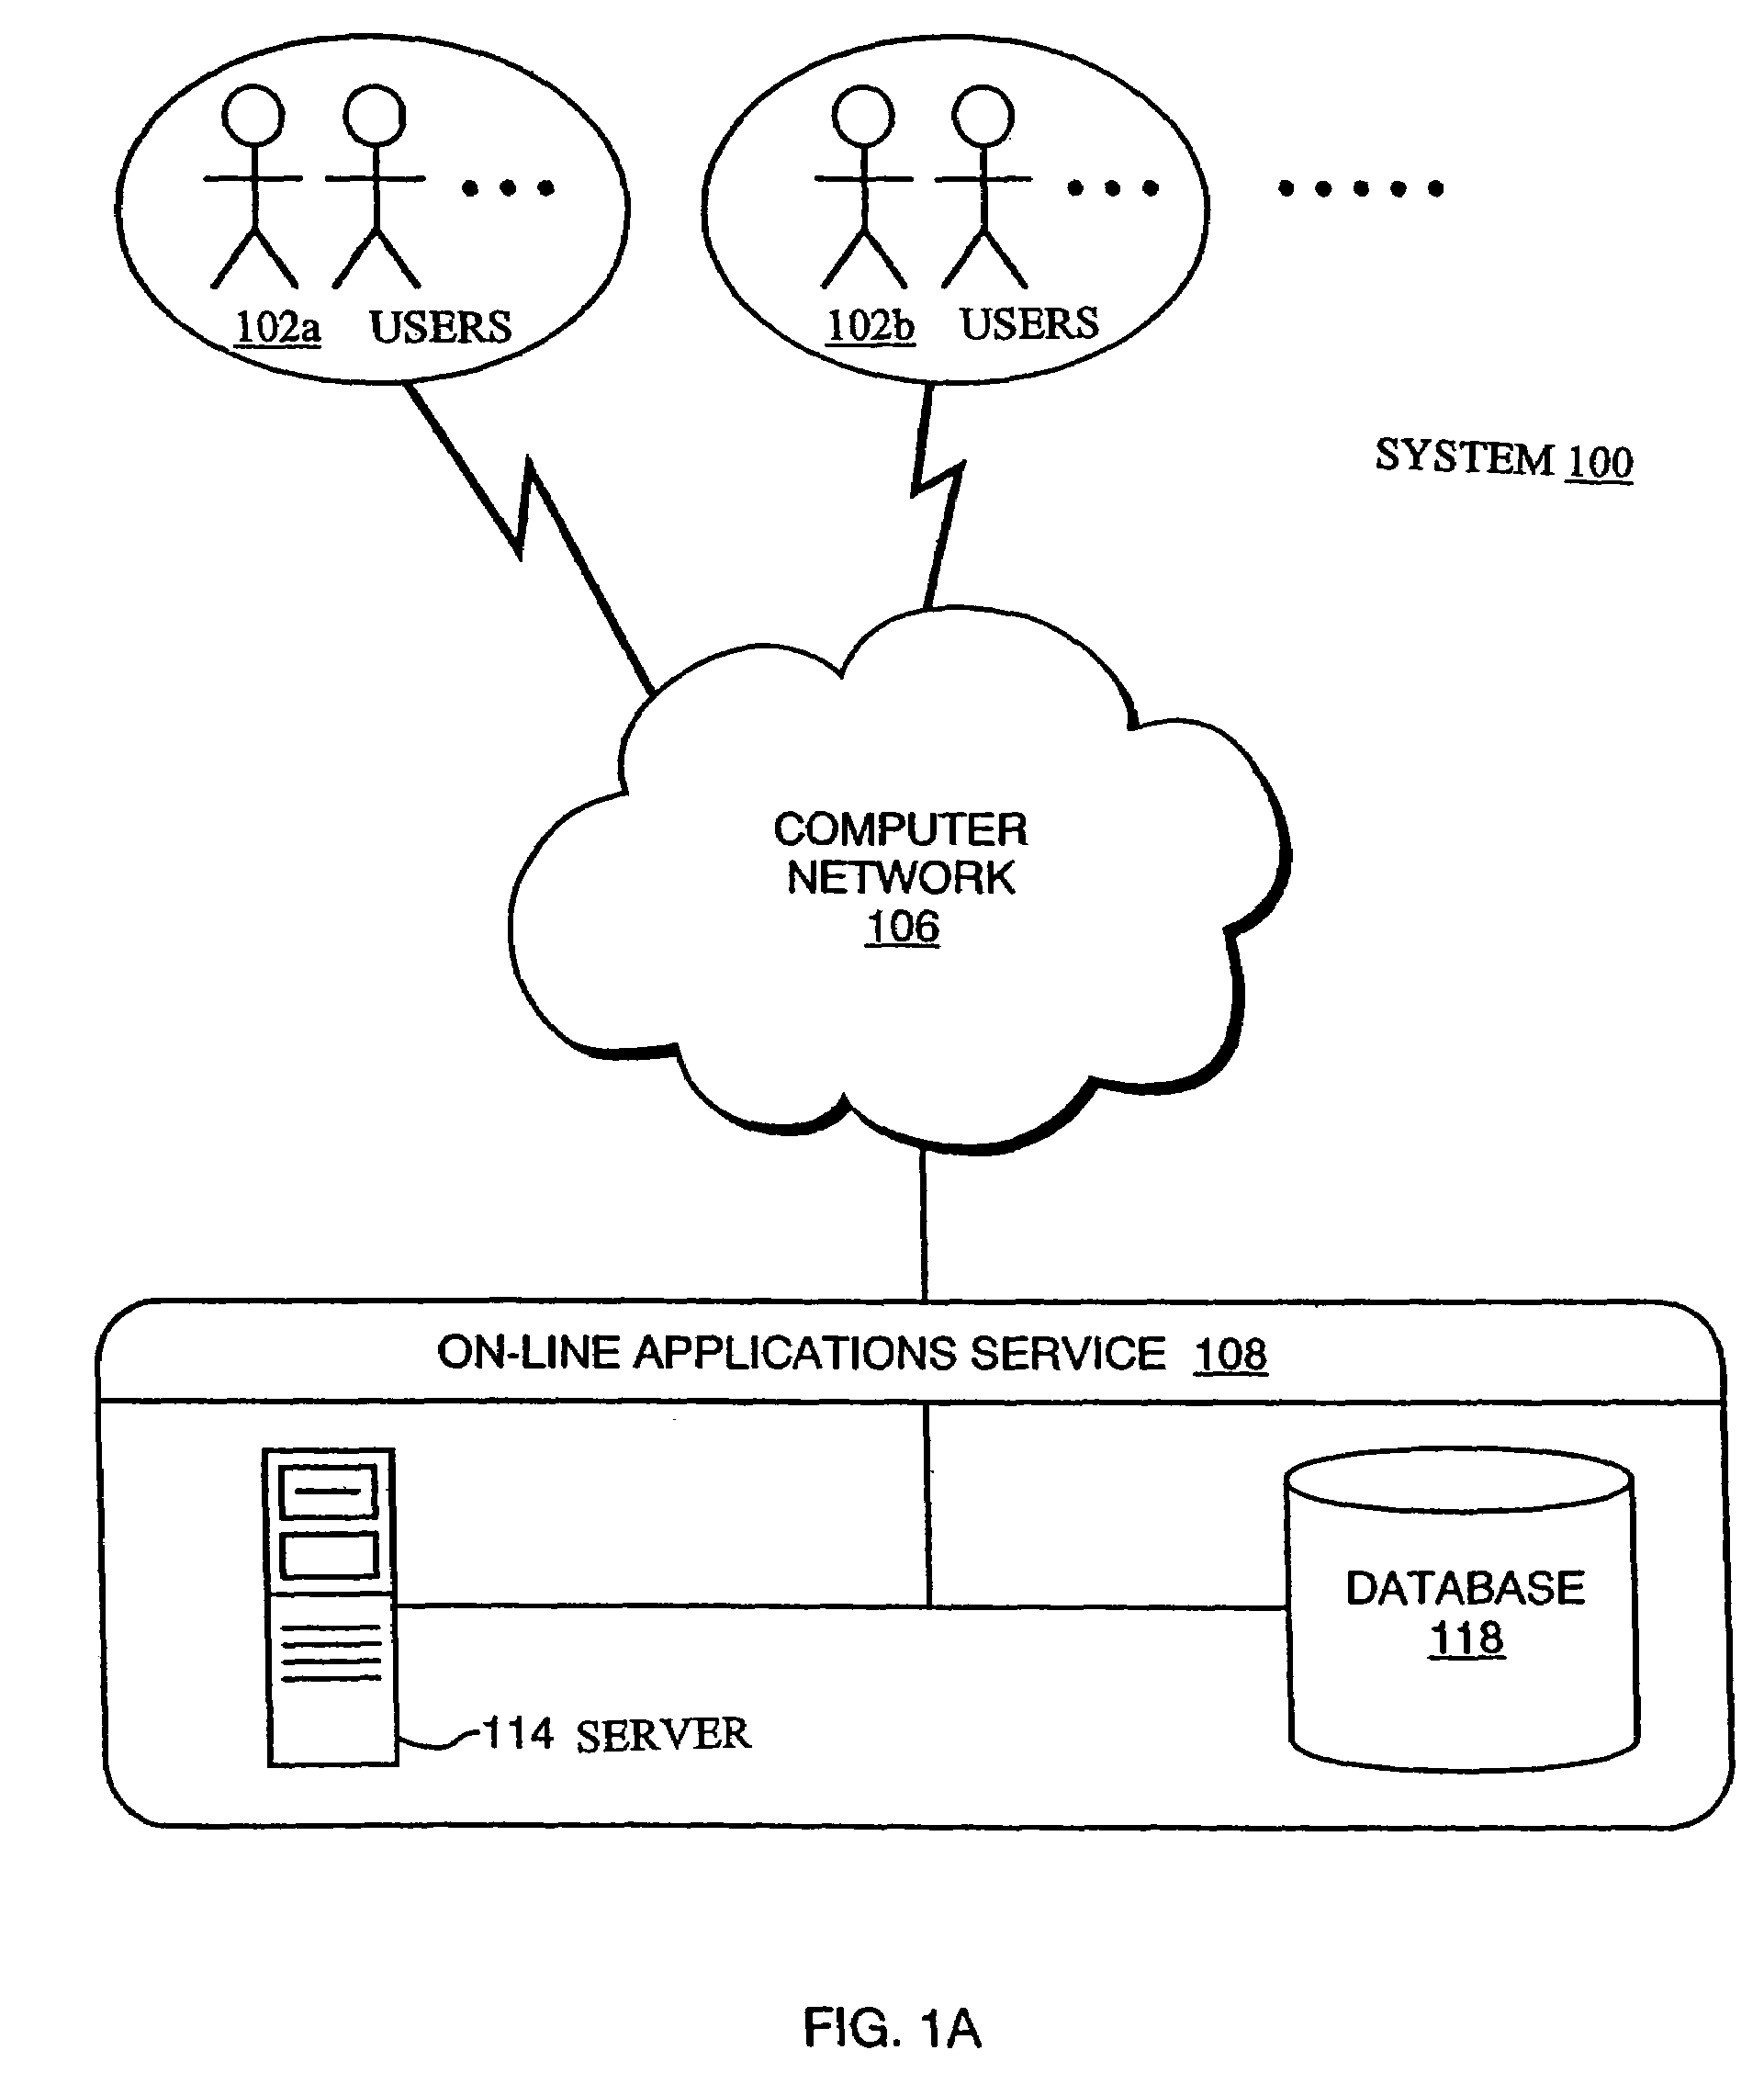 Method and apparatus for mapping a community through user interactions on a computer network